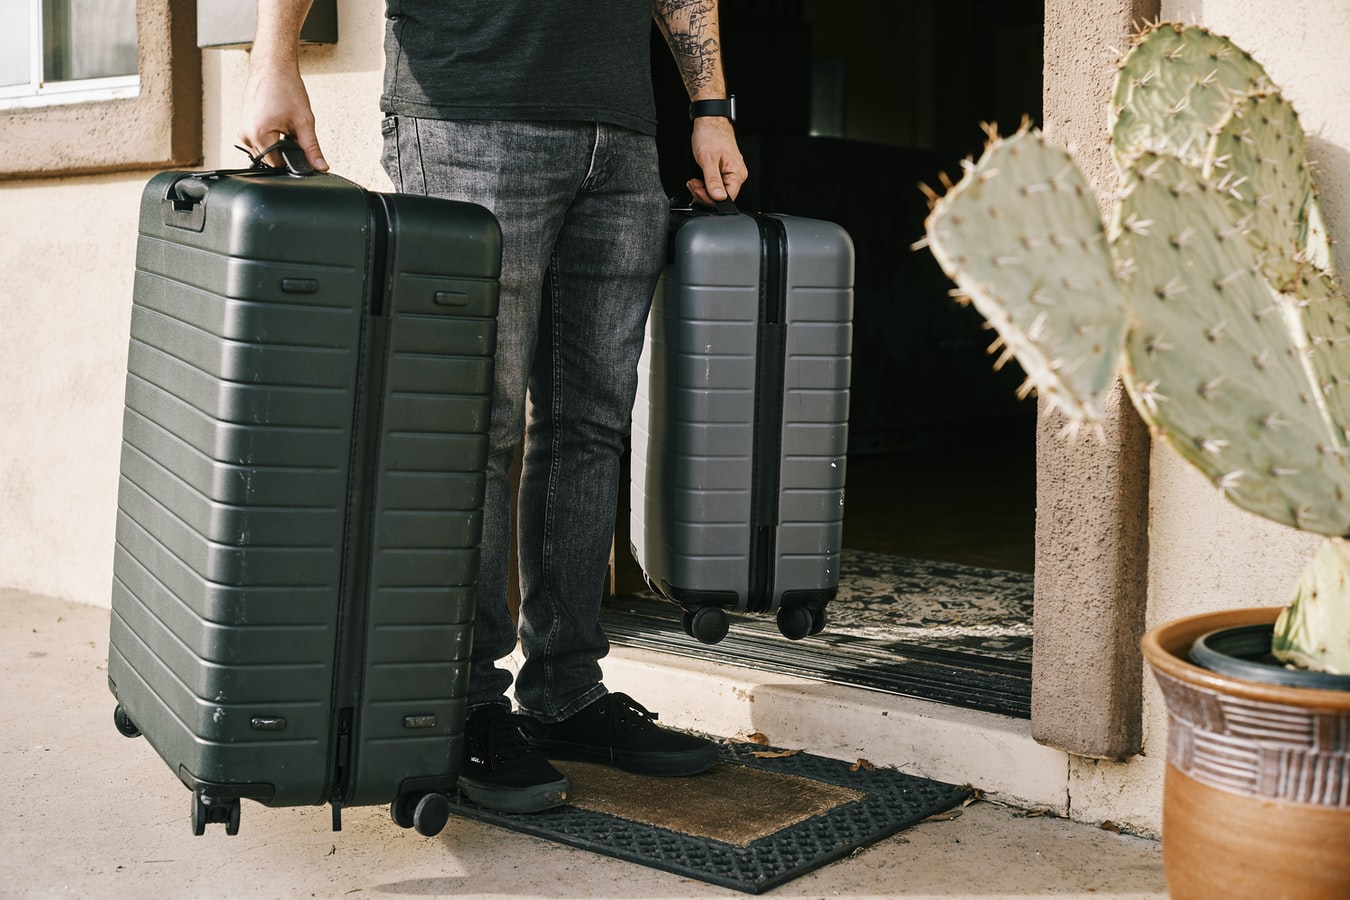 A man getting his suitcases ready as he is going to attend an addiction treatment center through involuntary commitment